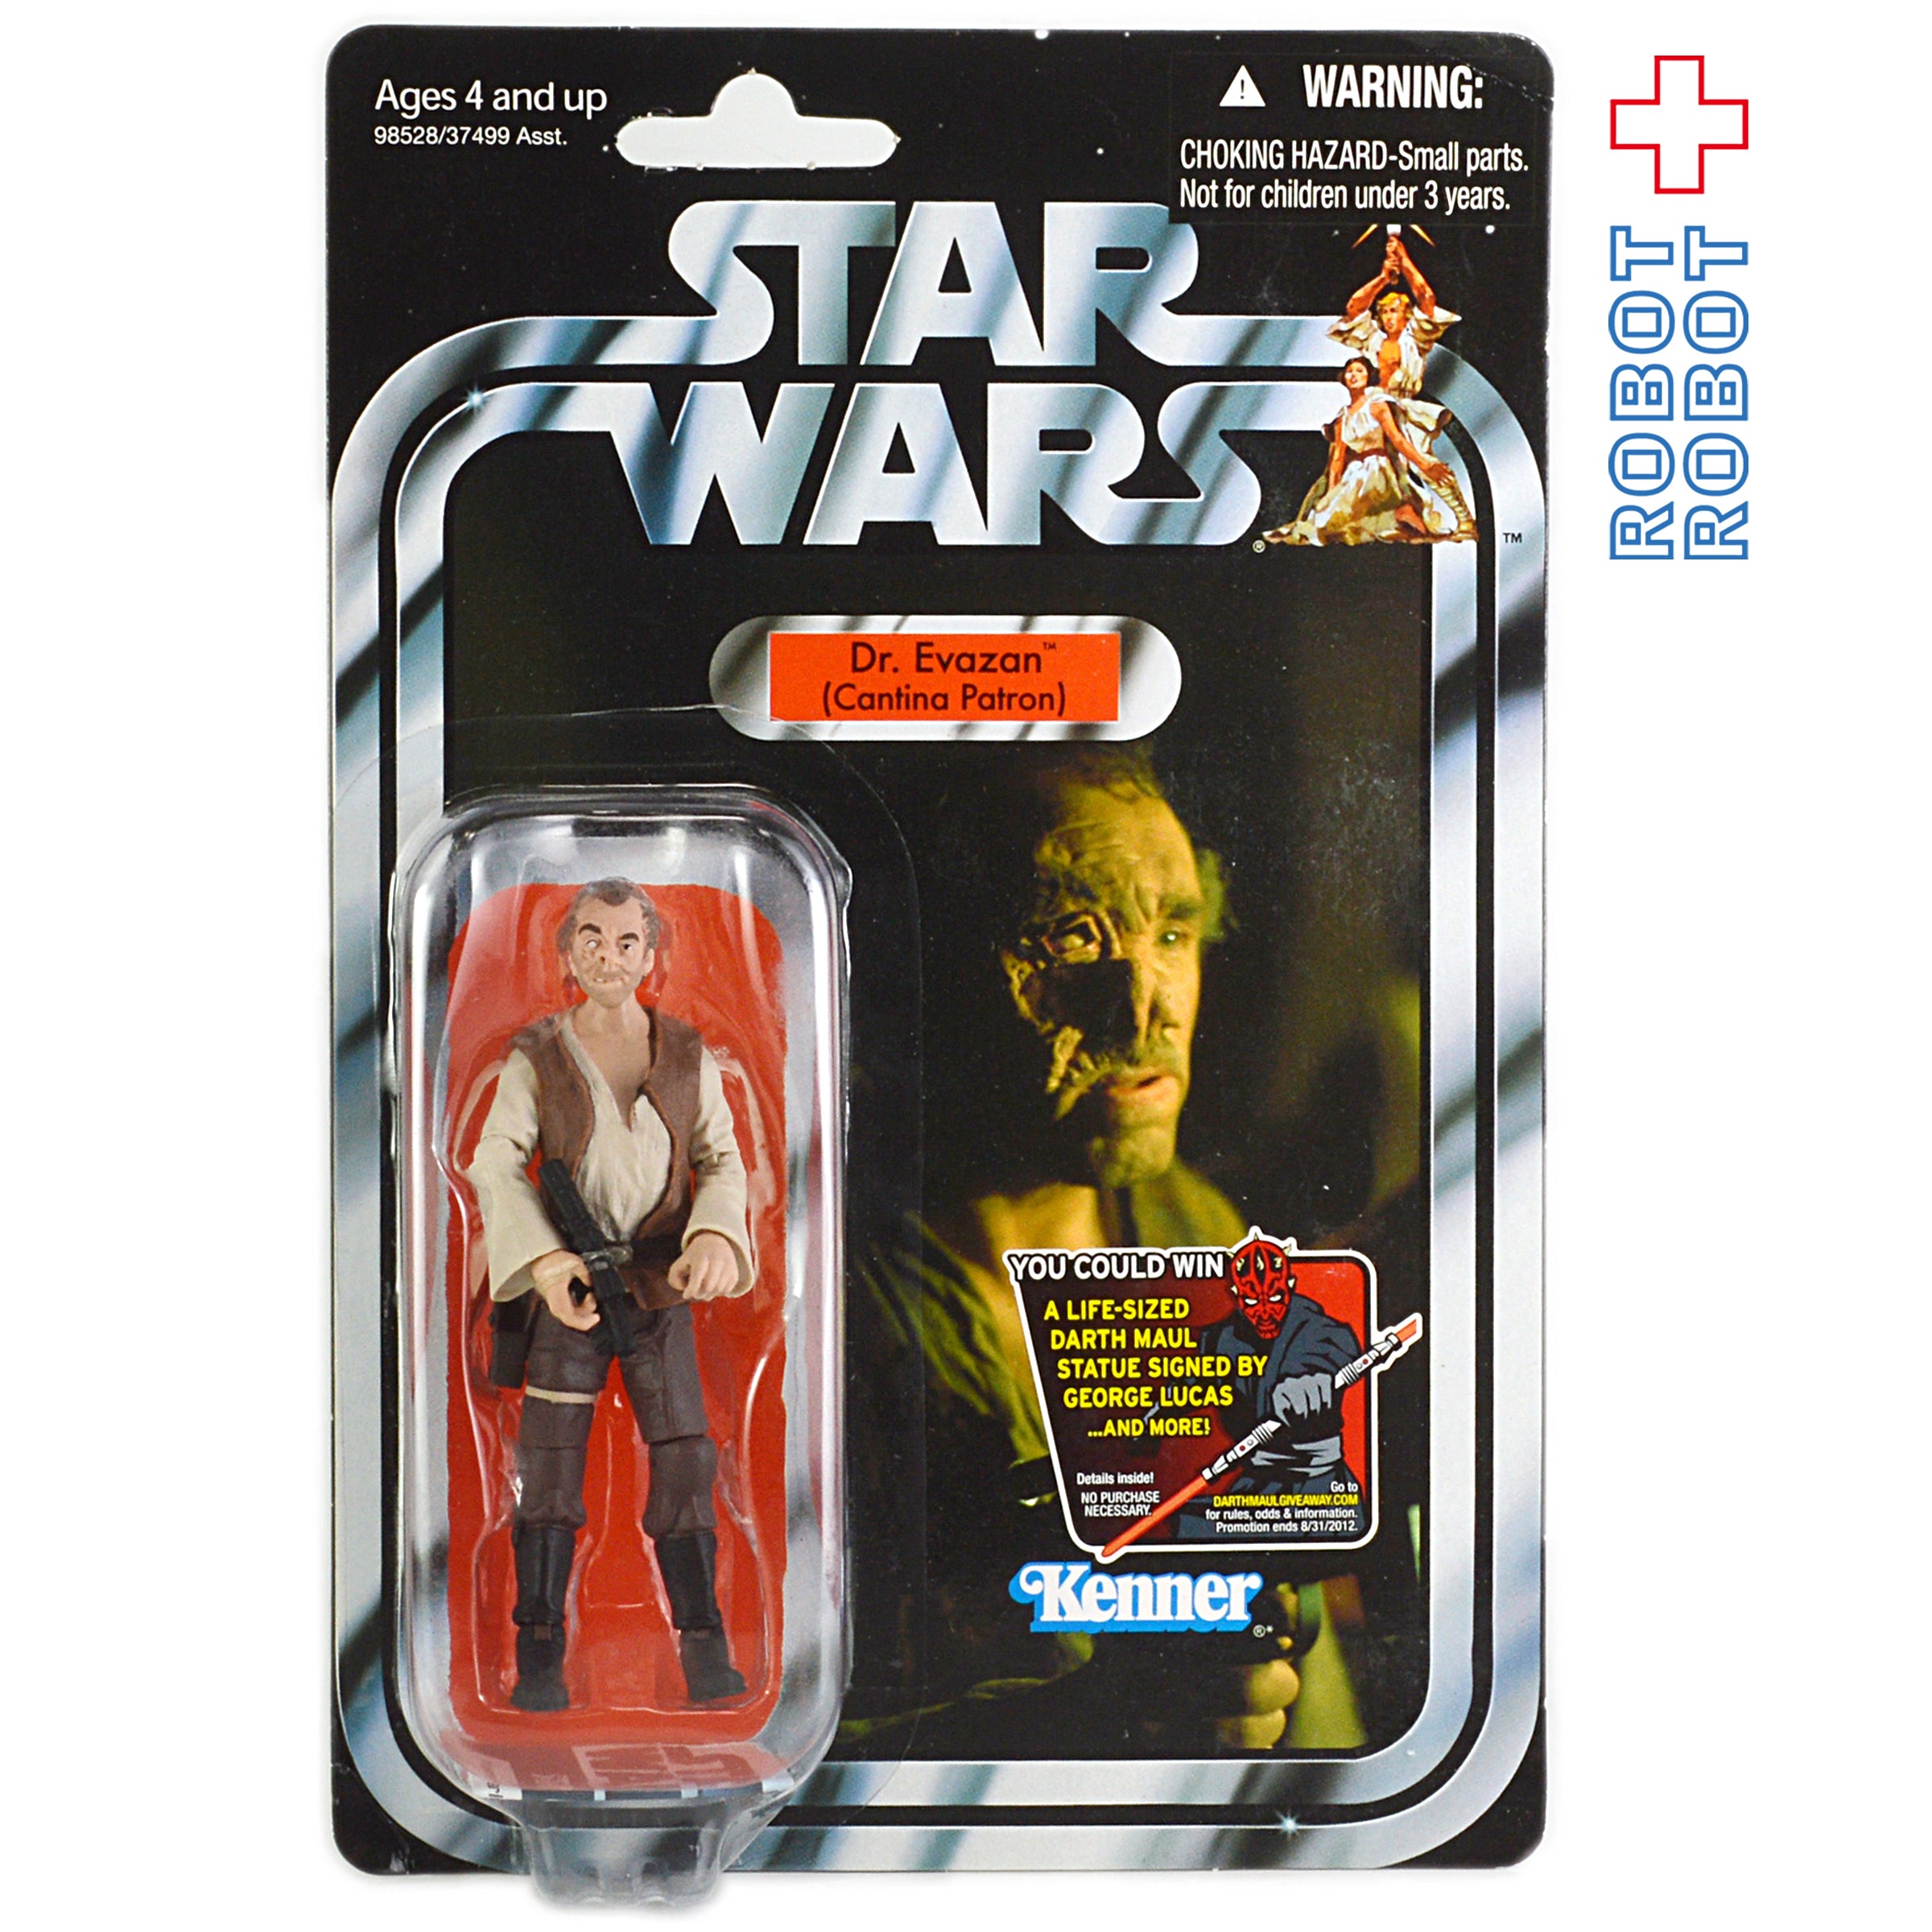 STAR WARS VINTAGE COLLECTION all – tagged 